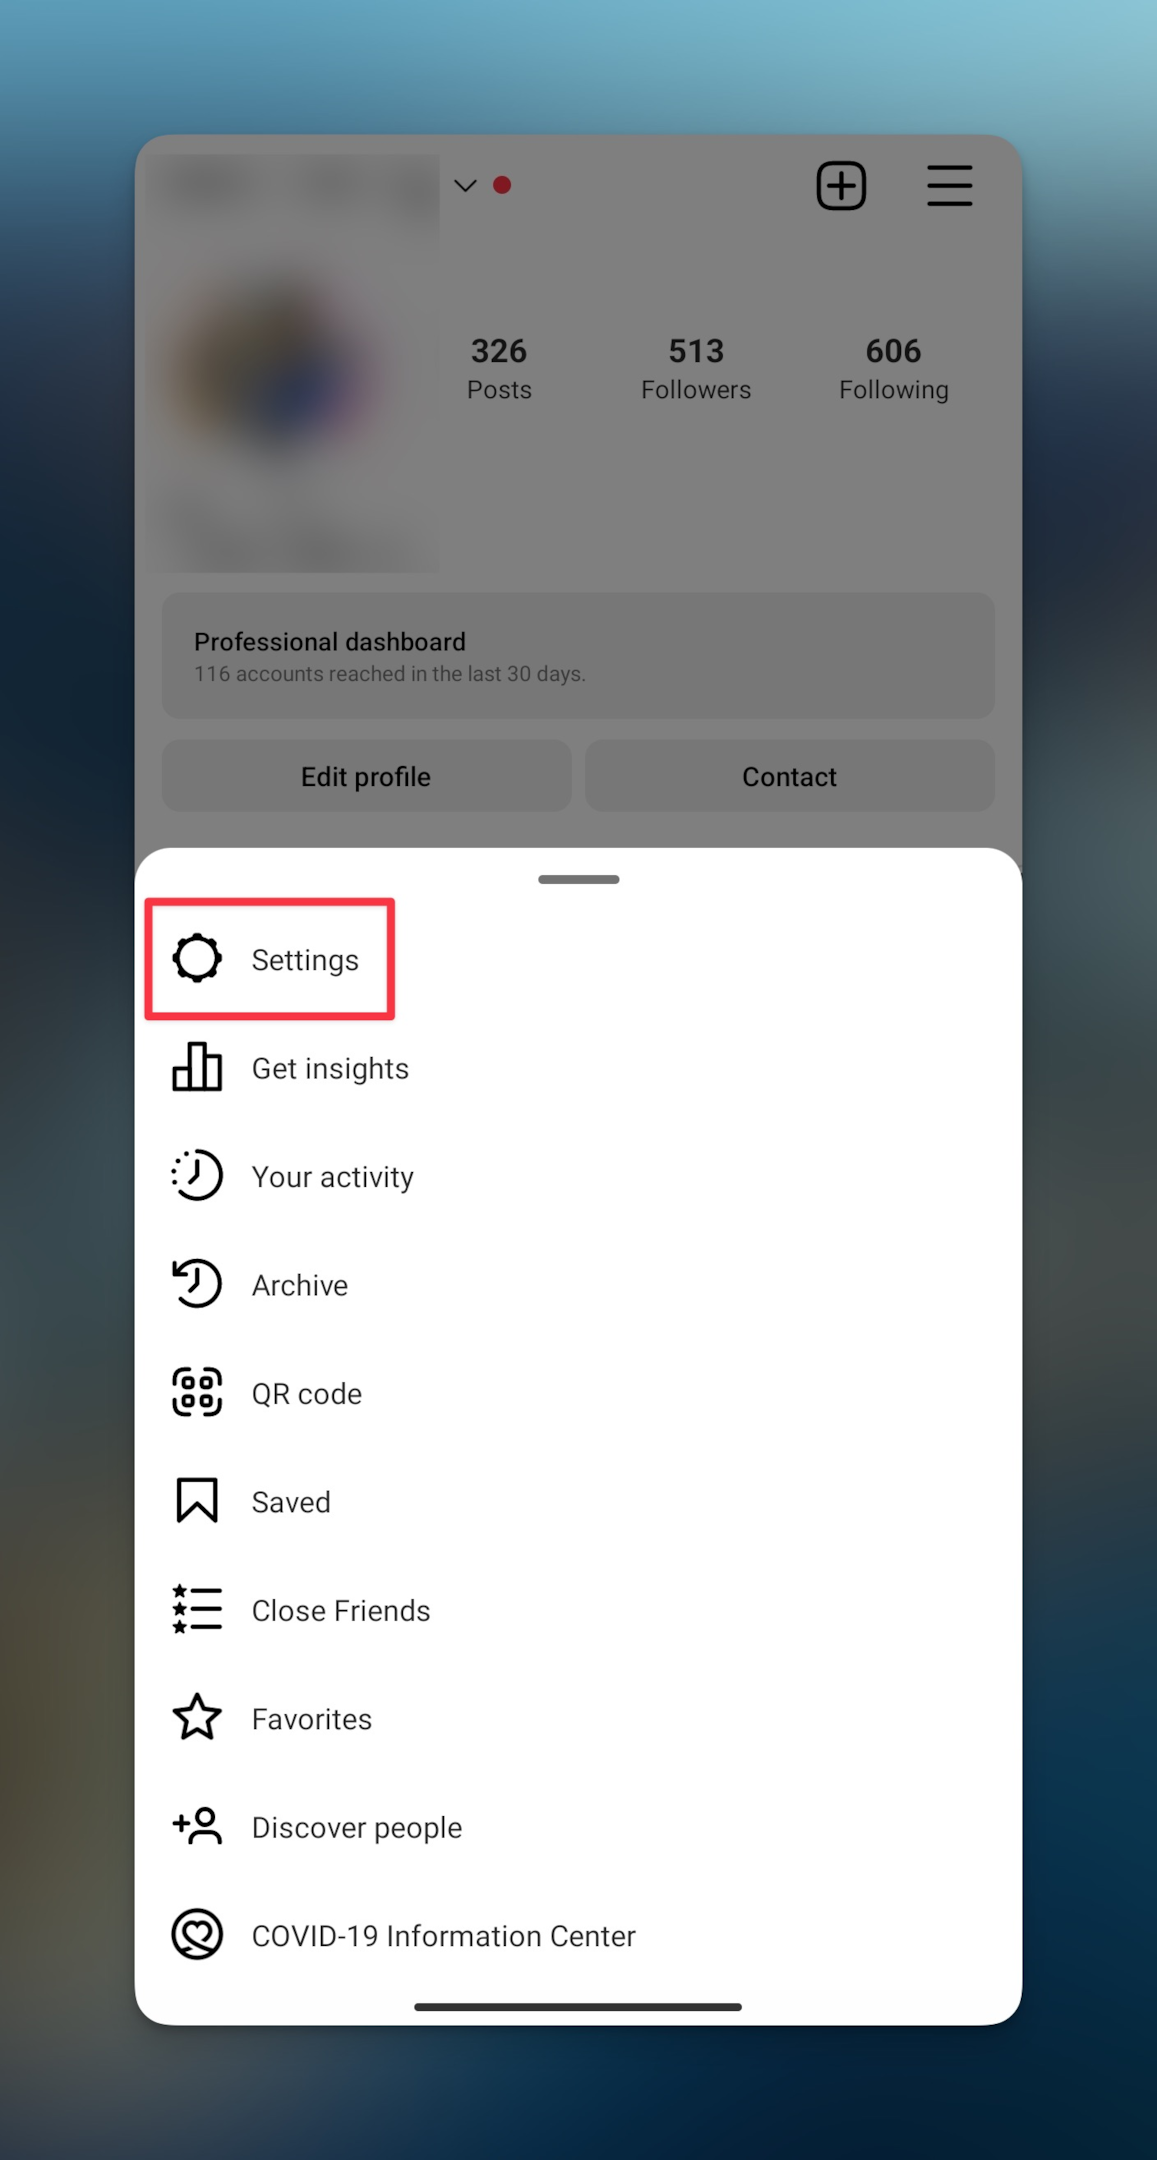 Remote.tools show to tap on "Settings" to pause notifications for your account